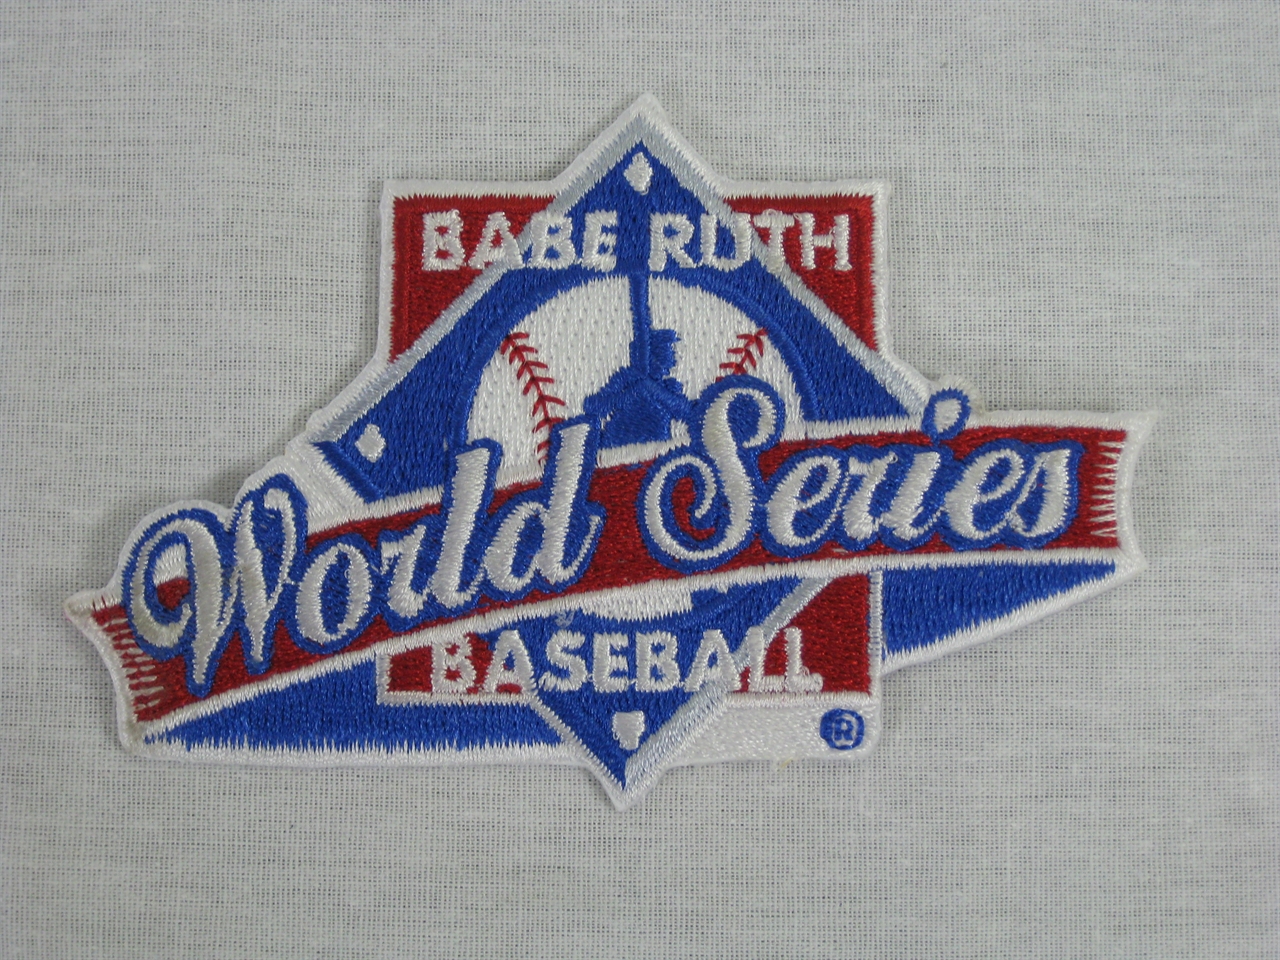 MLB 2023 World Series Collectors Patch